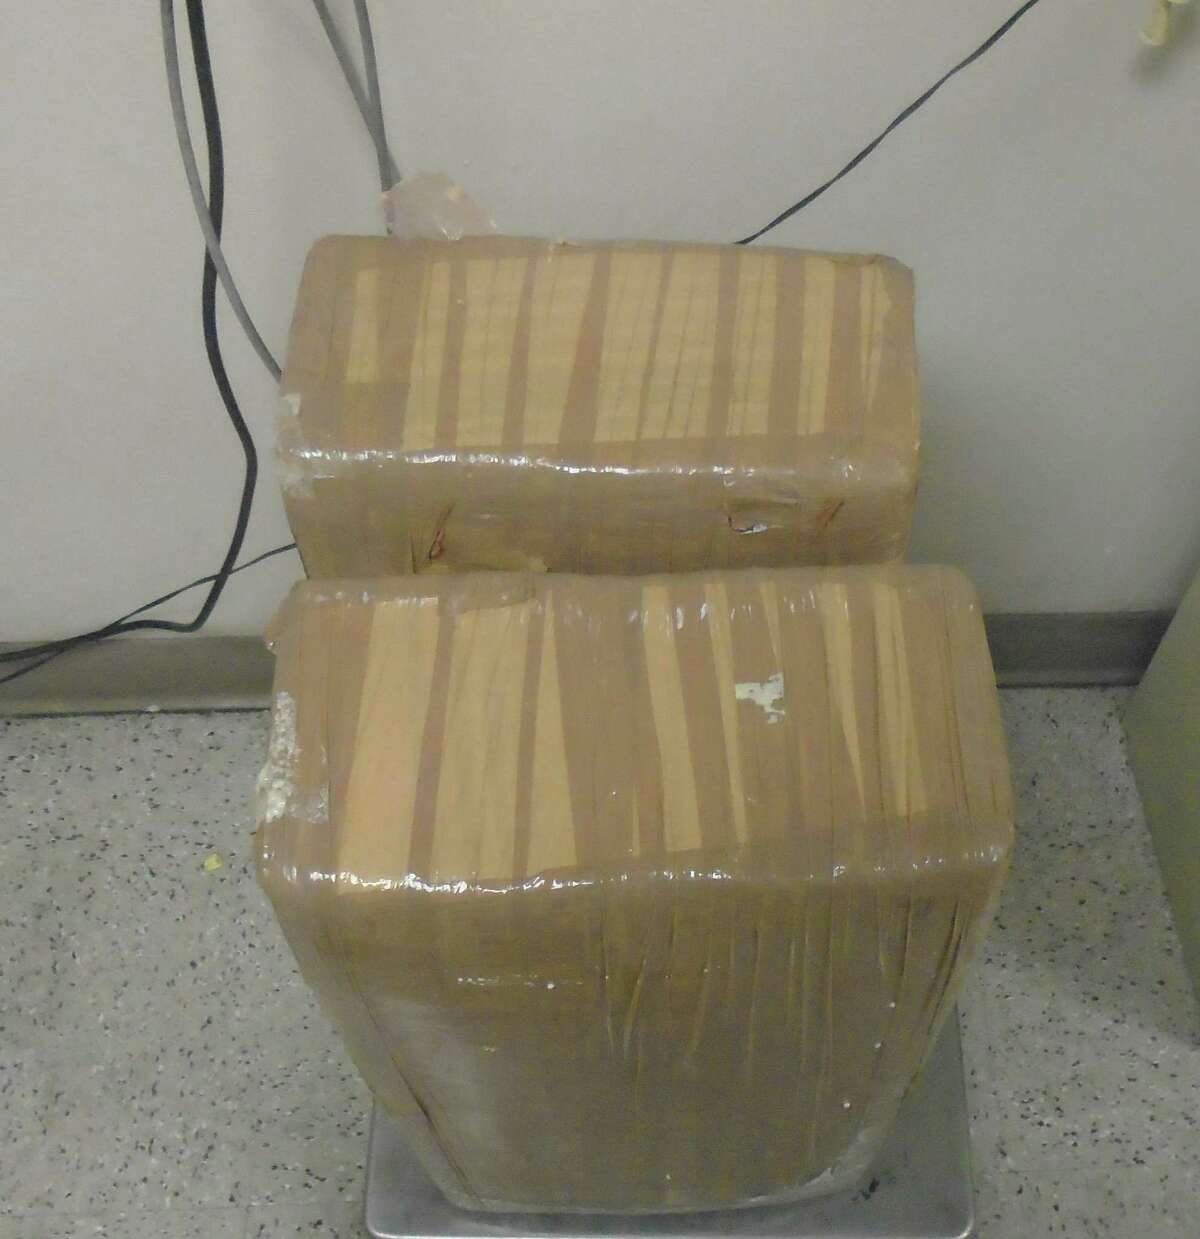 CBP seized about 60 pounds of marijuana Wednesday at the World Trade Bridge when an officer referred an express consignment international courier service truck for a secondary examination.